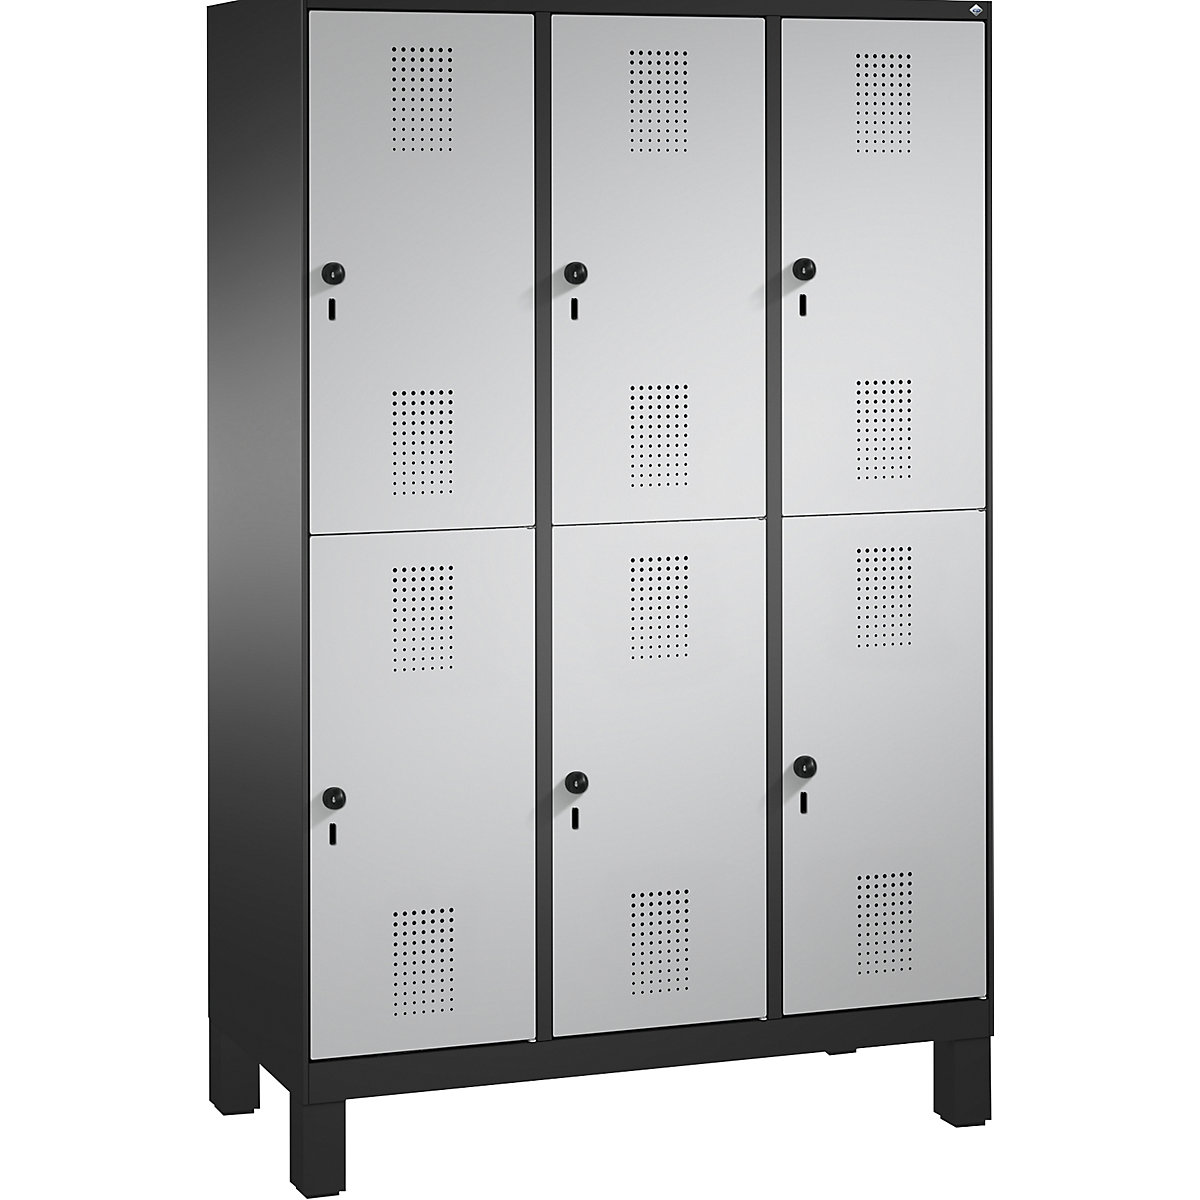 EVOLO cloakroom locker, double tier, with feet – C+P, 3 compartments, 2 shelf compartments each, compartment width 400 mm, black grey / white aluminium-16